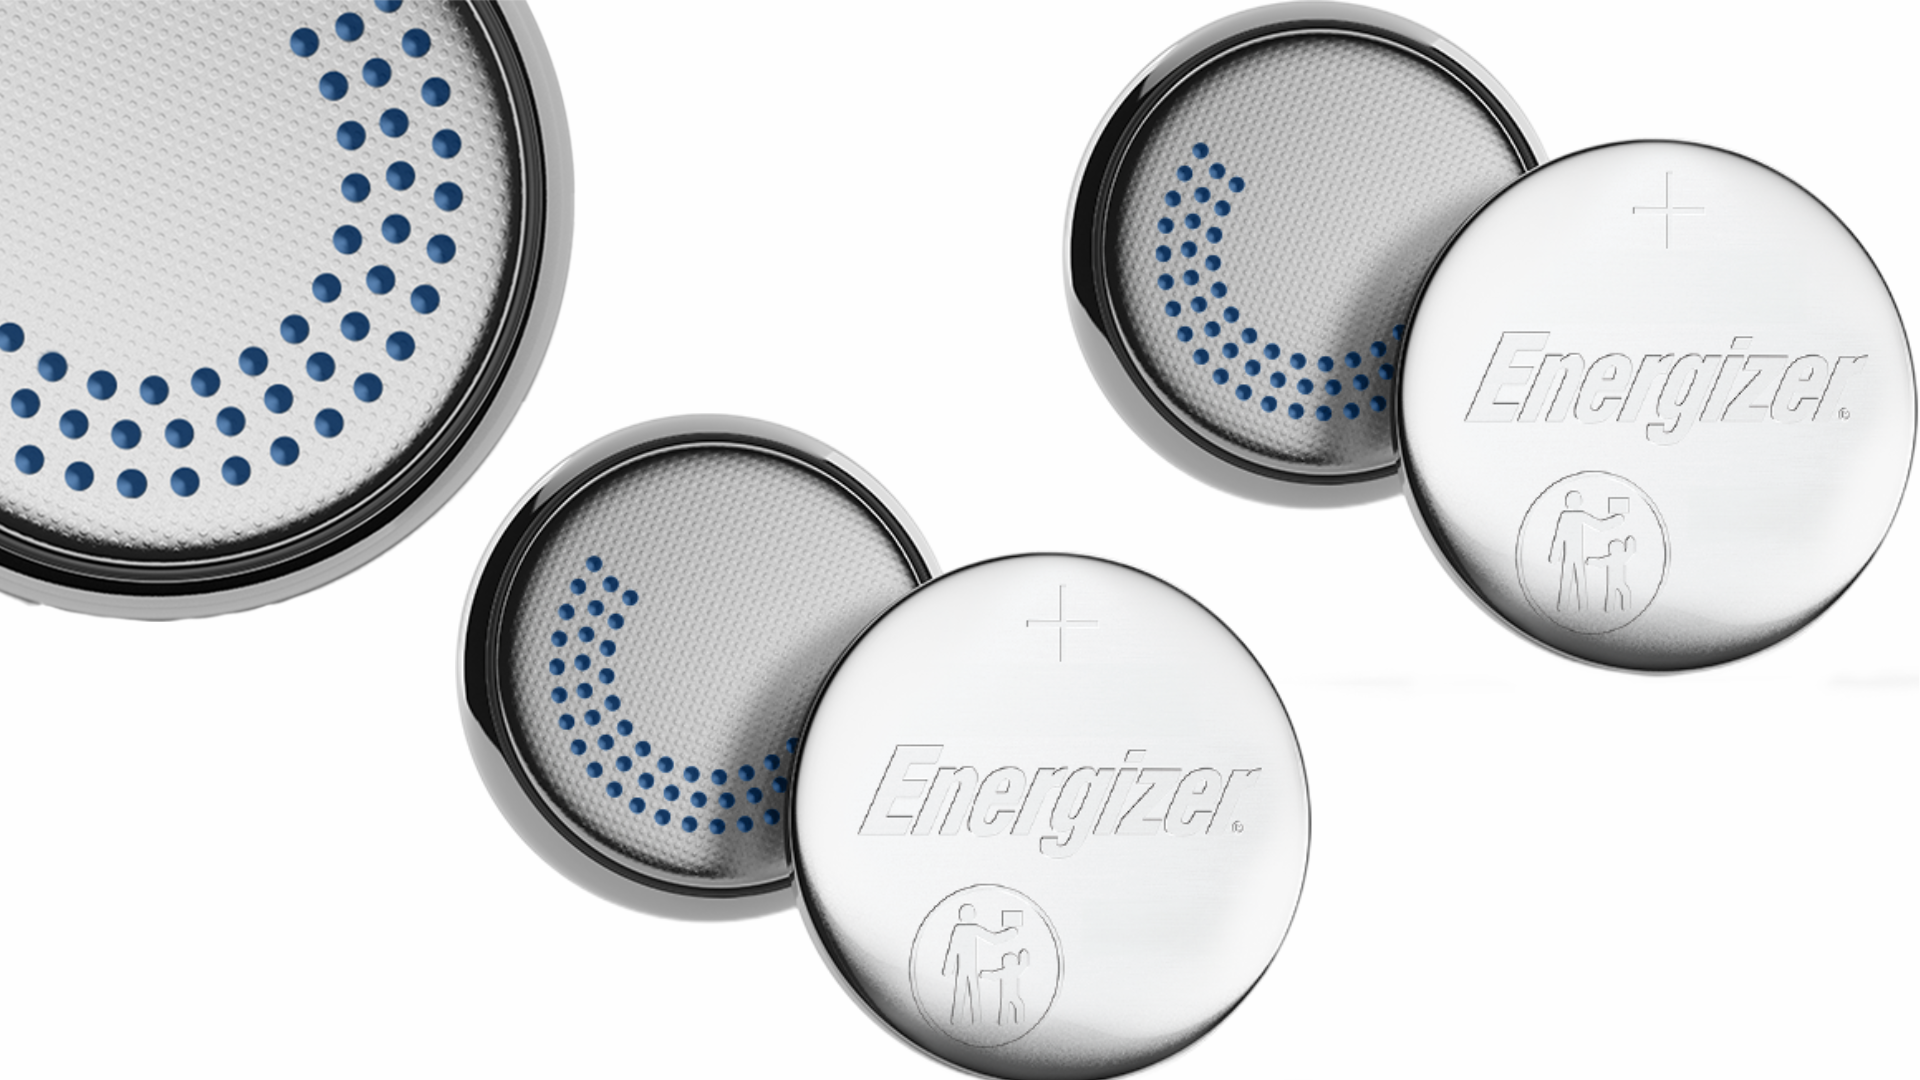 Energizer’s new coin batterycolorskids’mouthsifswallowed [Video]